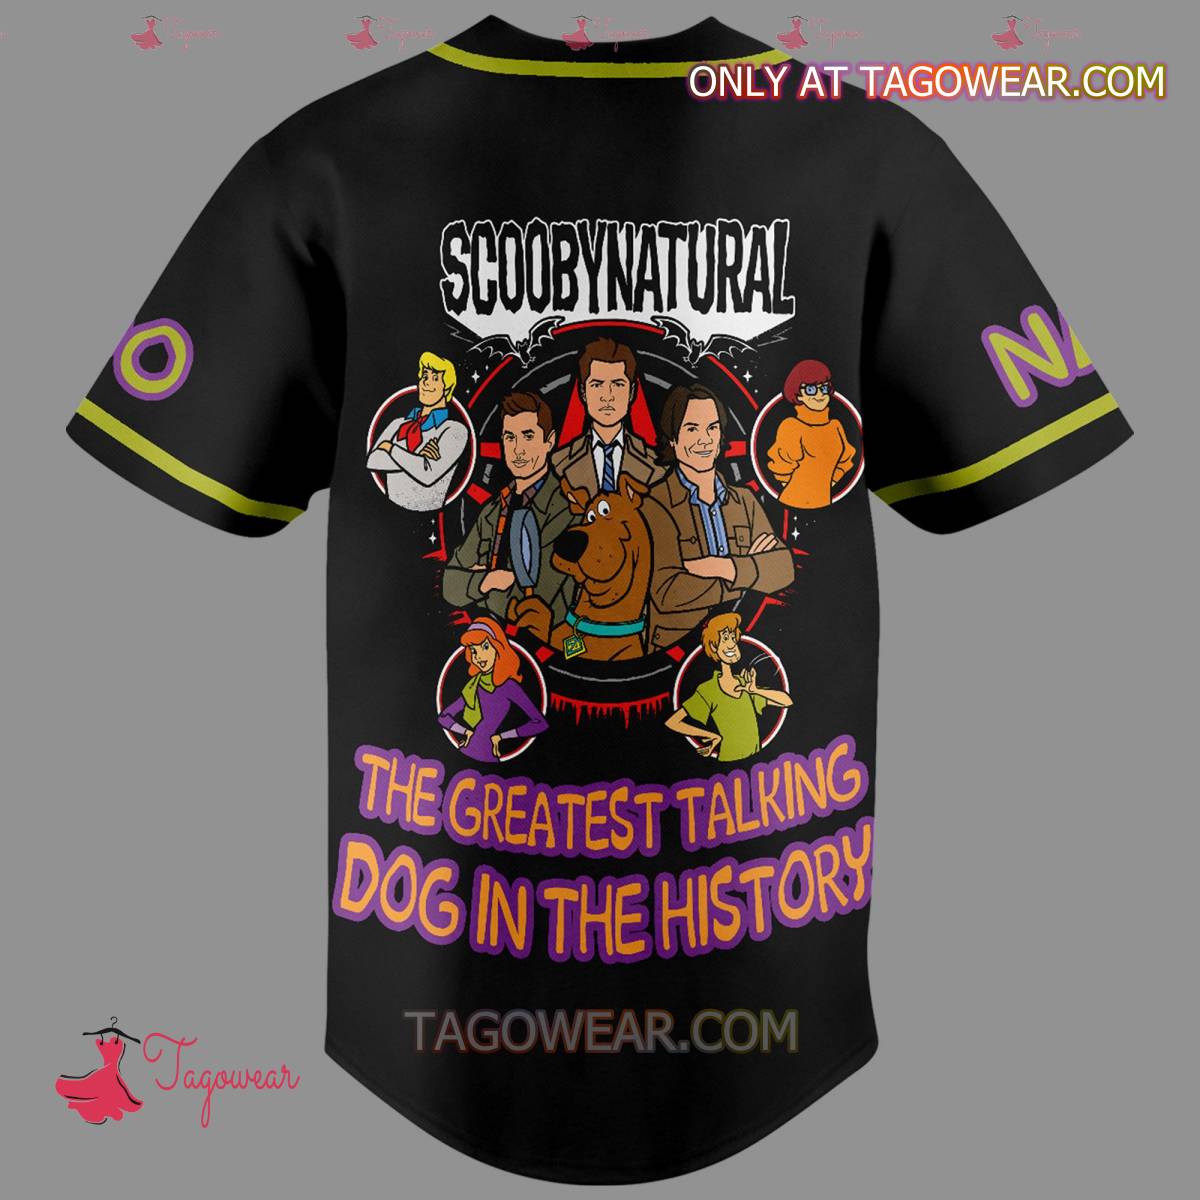 Scooby-natural The Greatest Talking Dog In The History Personalized Baseball Jersey b